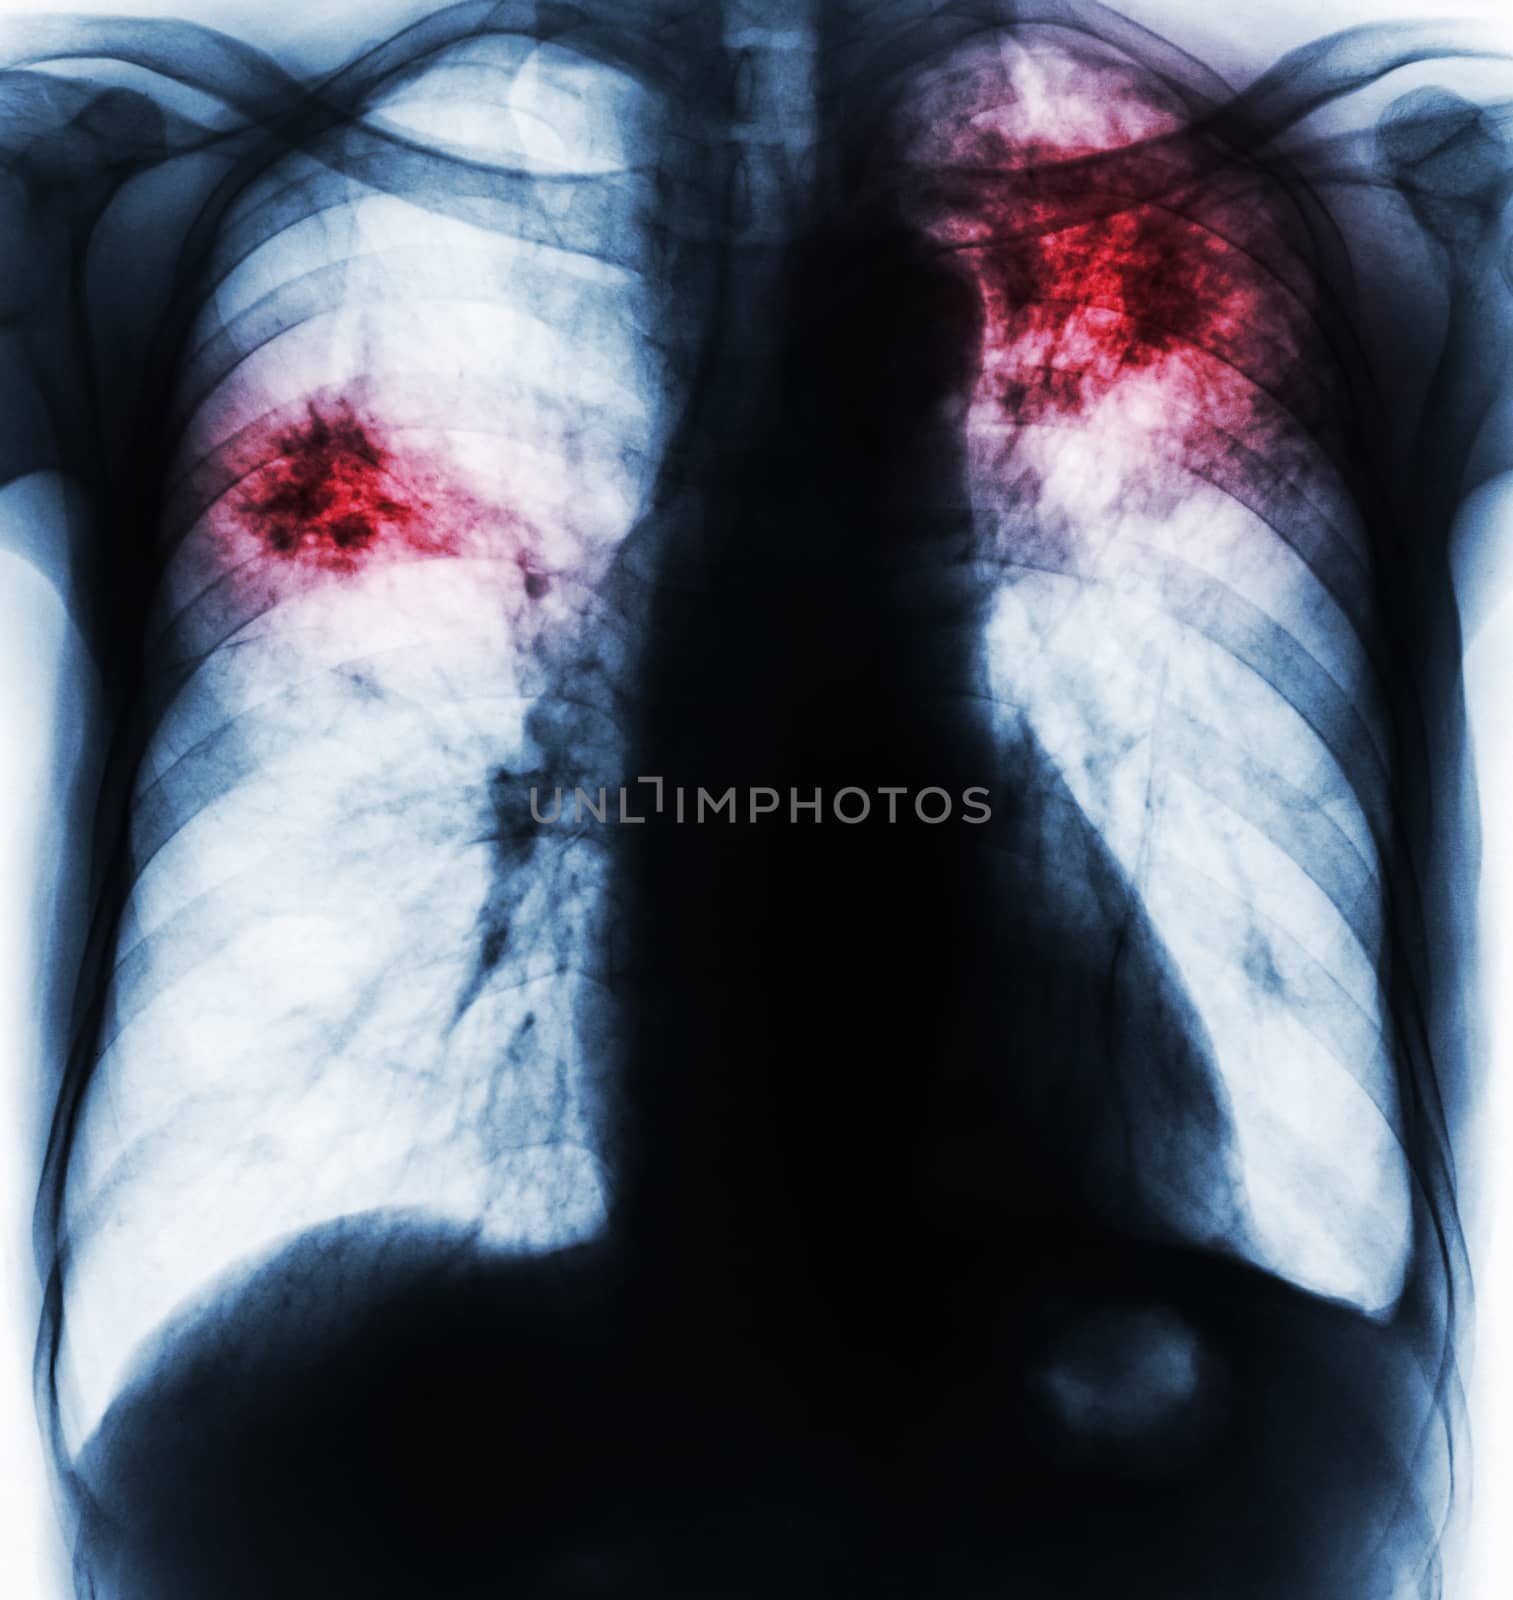 Pulmonary Tuberculosis . Film chest x-ray show fibrosis , interstitial infiltration both lung due to Mycobacterium tuberculosis infection .